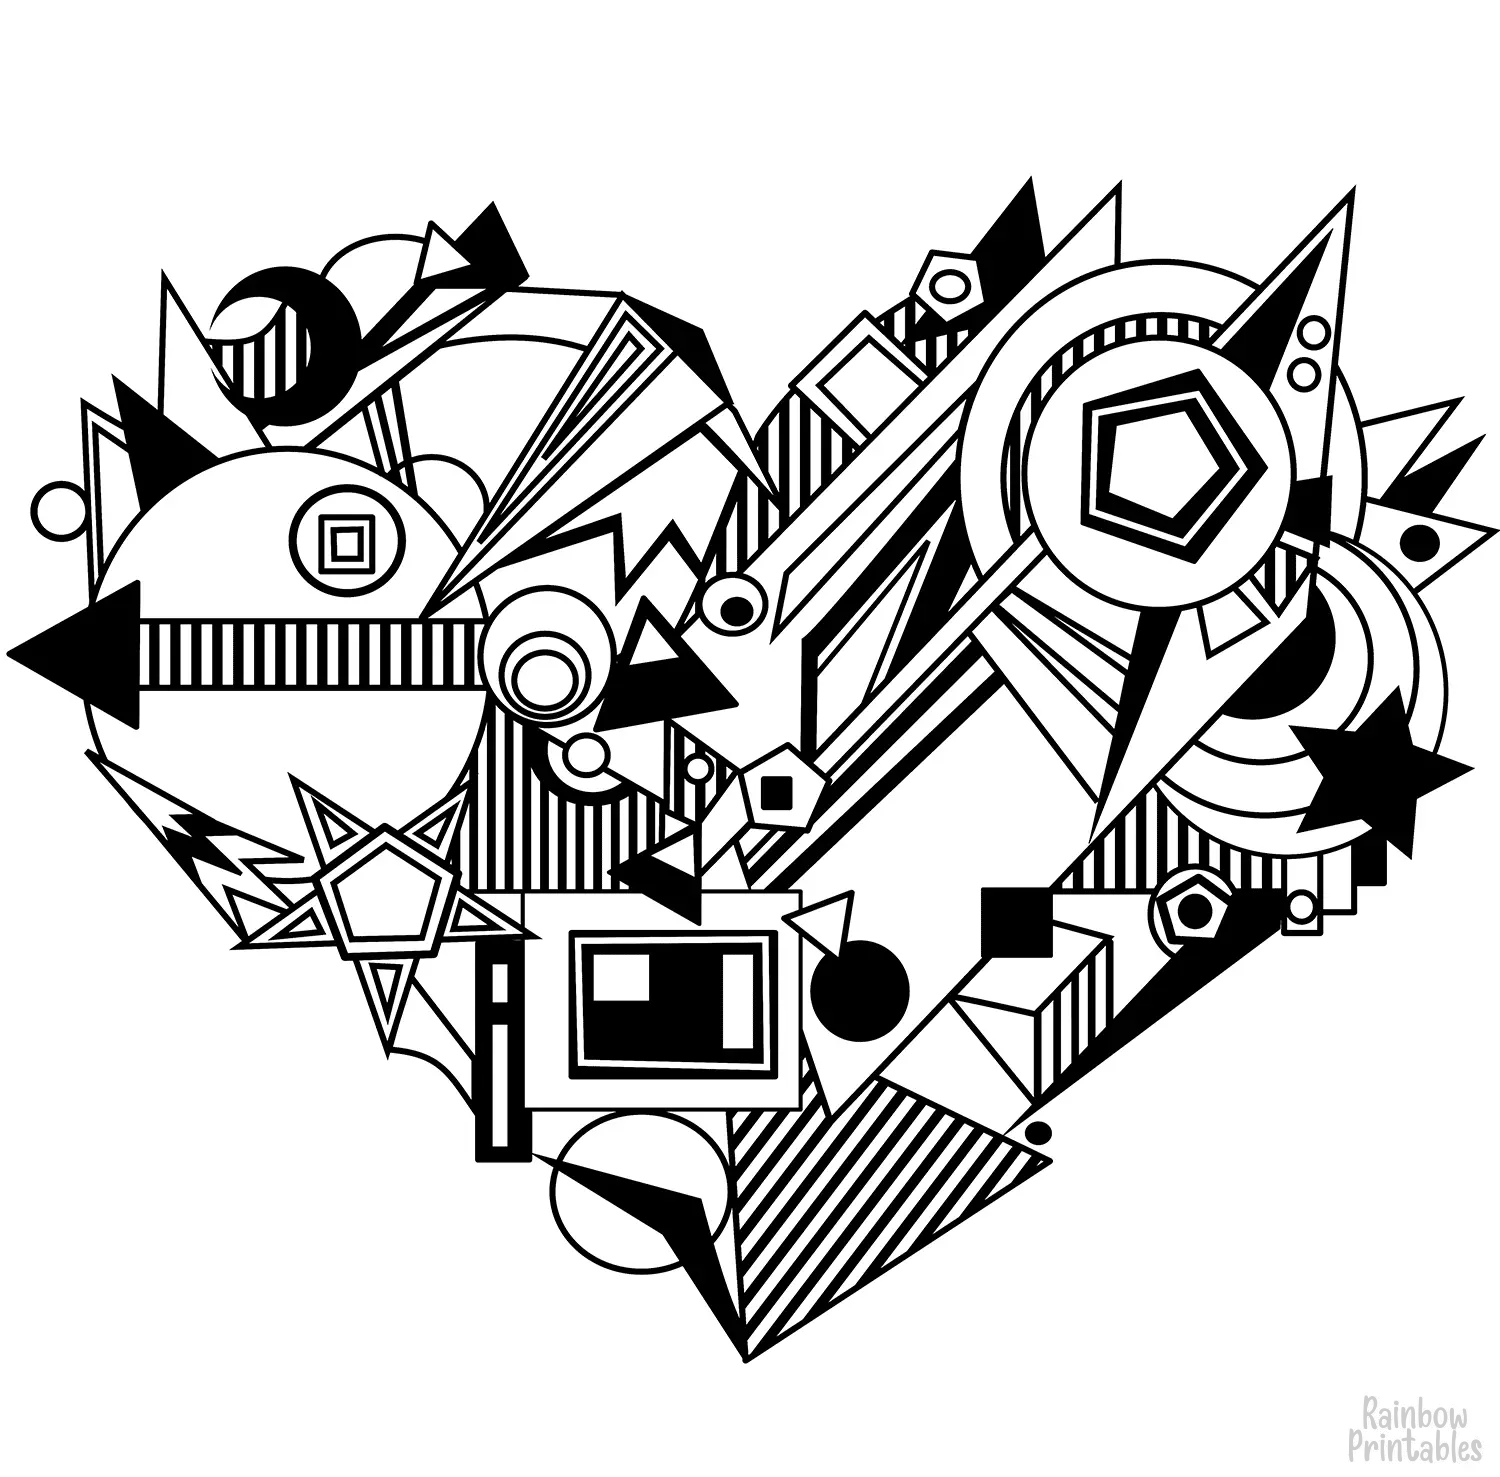 ABSTRACT SIMPLE HEART Mandala Coloring Pages for Kids Adults Boredom Art Activities Line Art